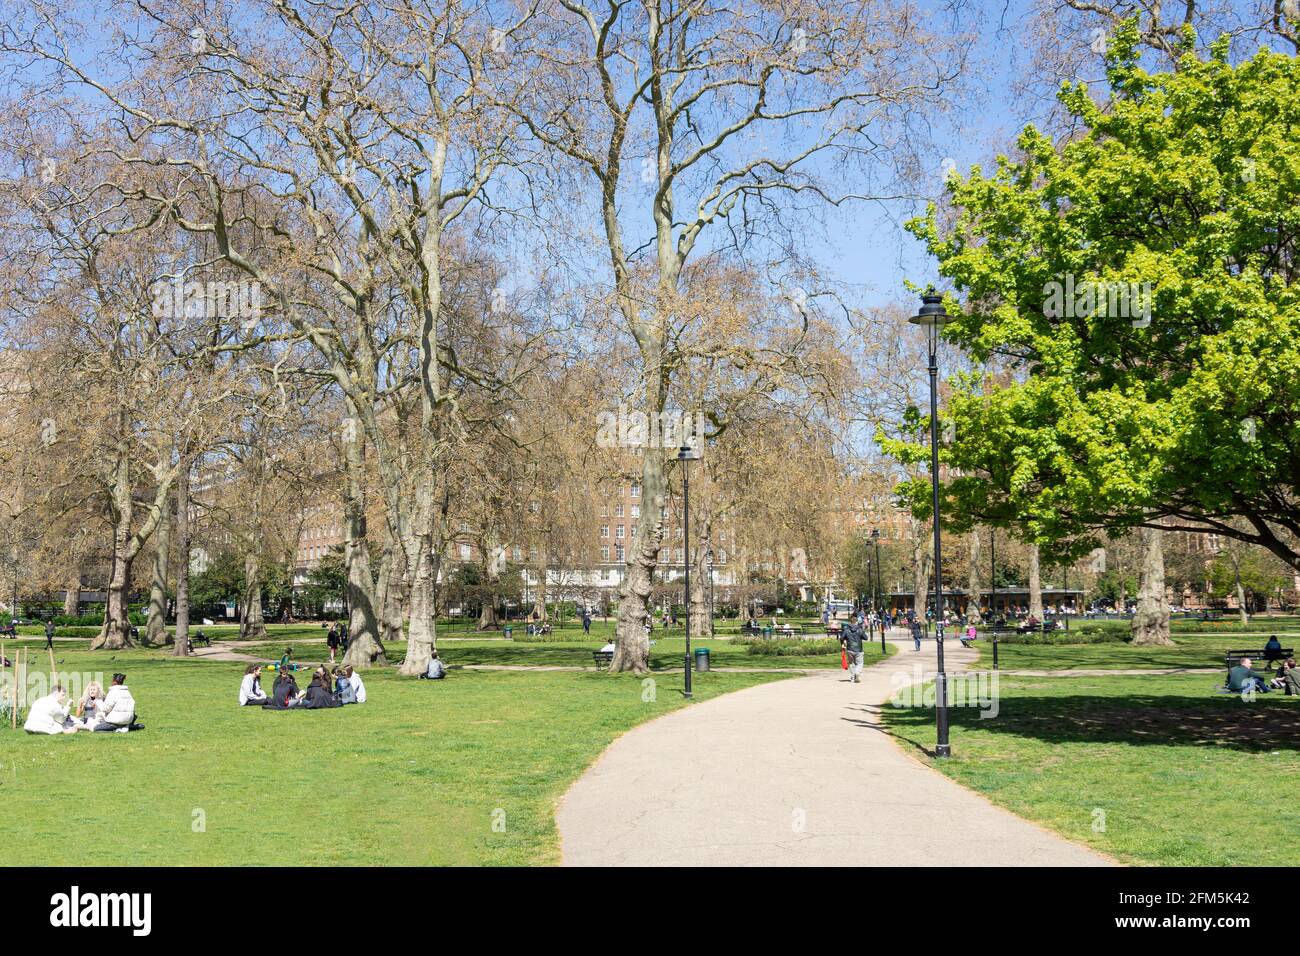 Bloomsbury russell square gardens trees lawns open spaces public hi-res ...